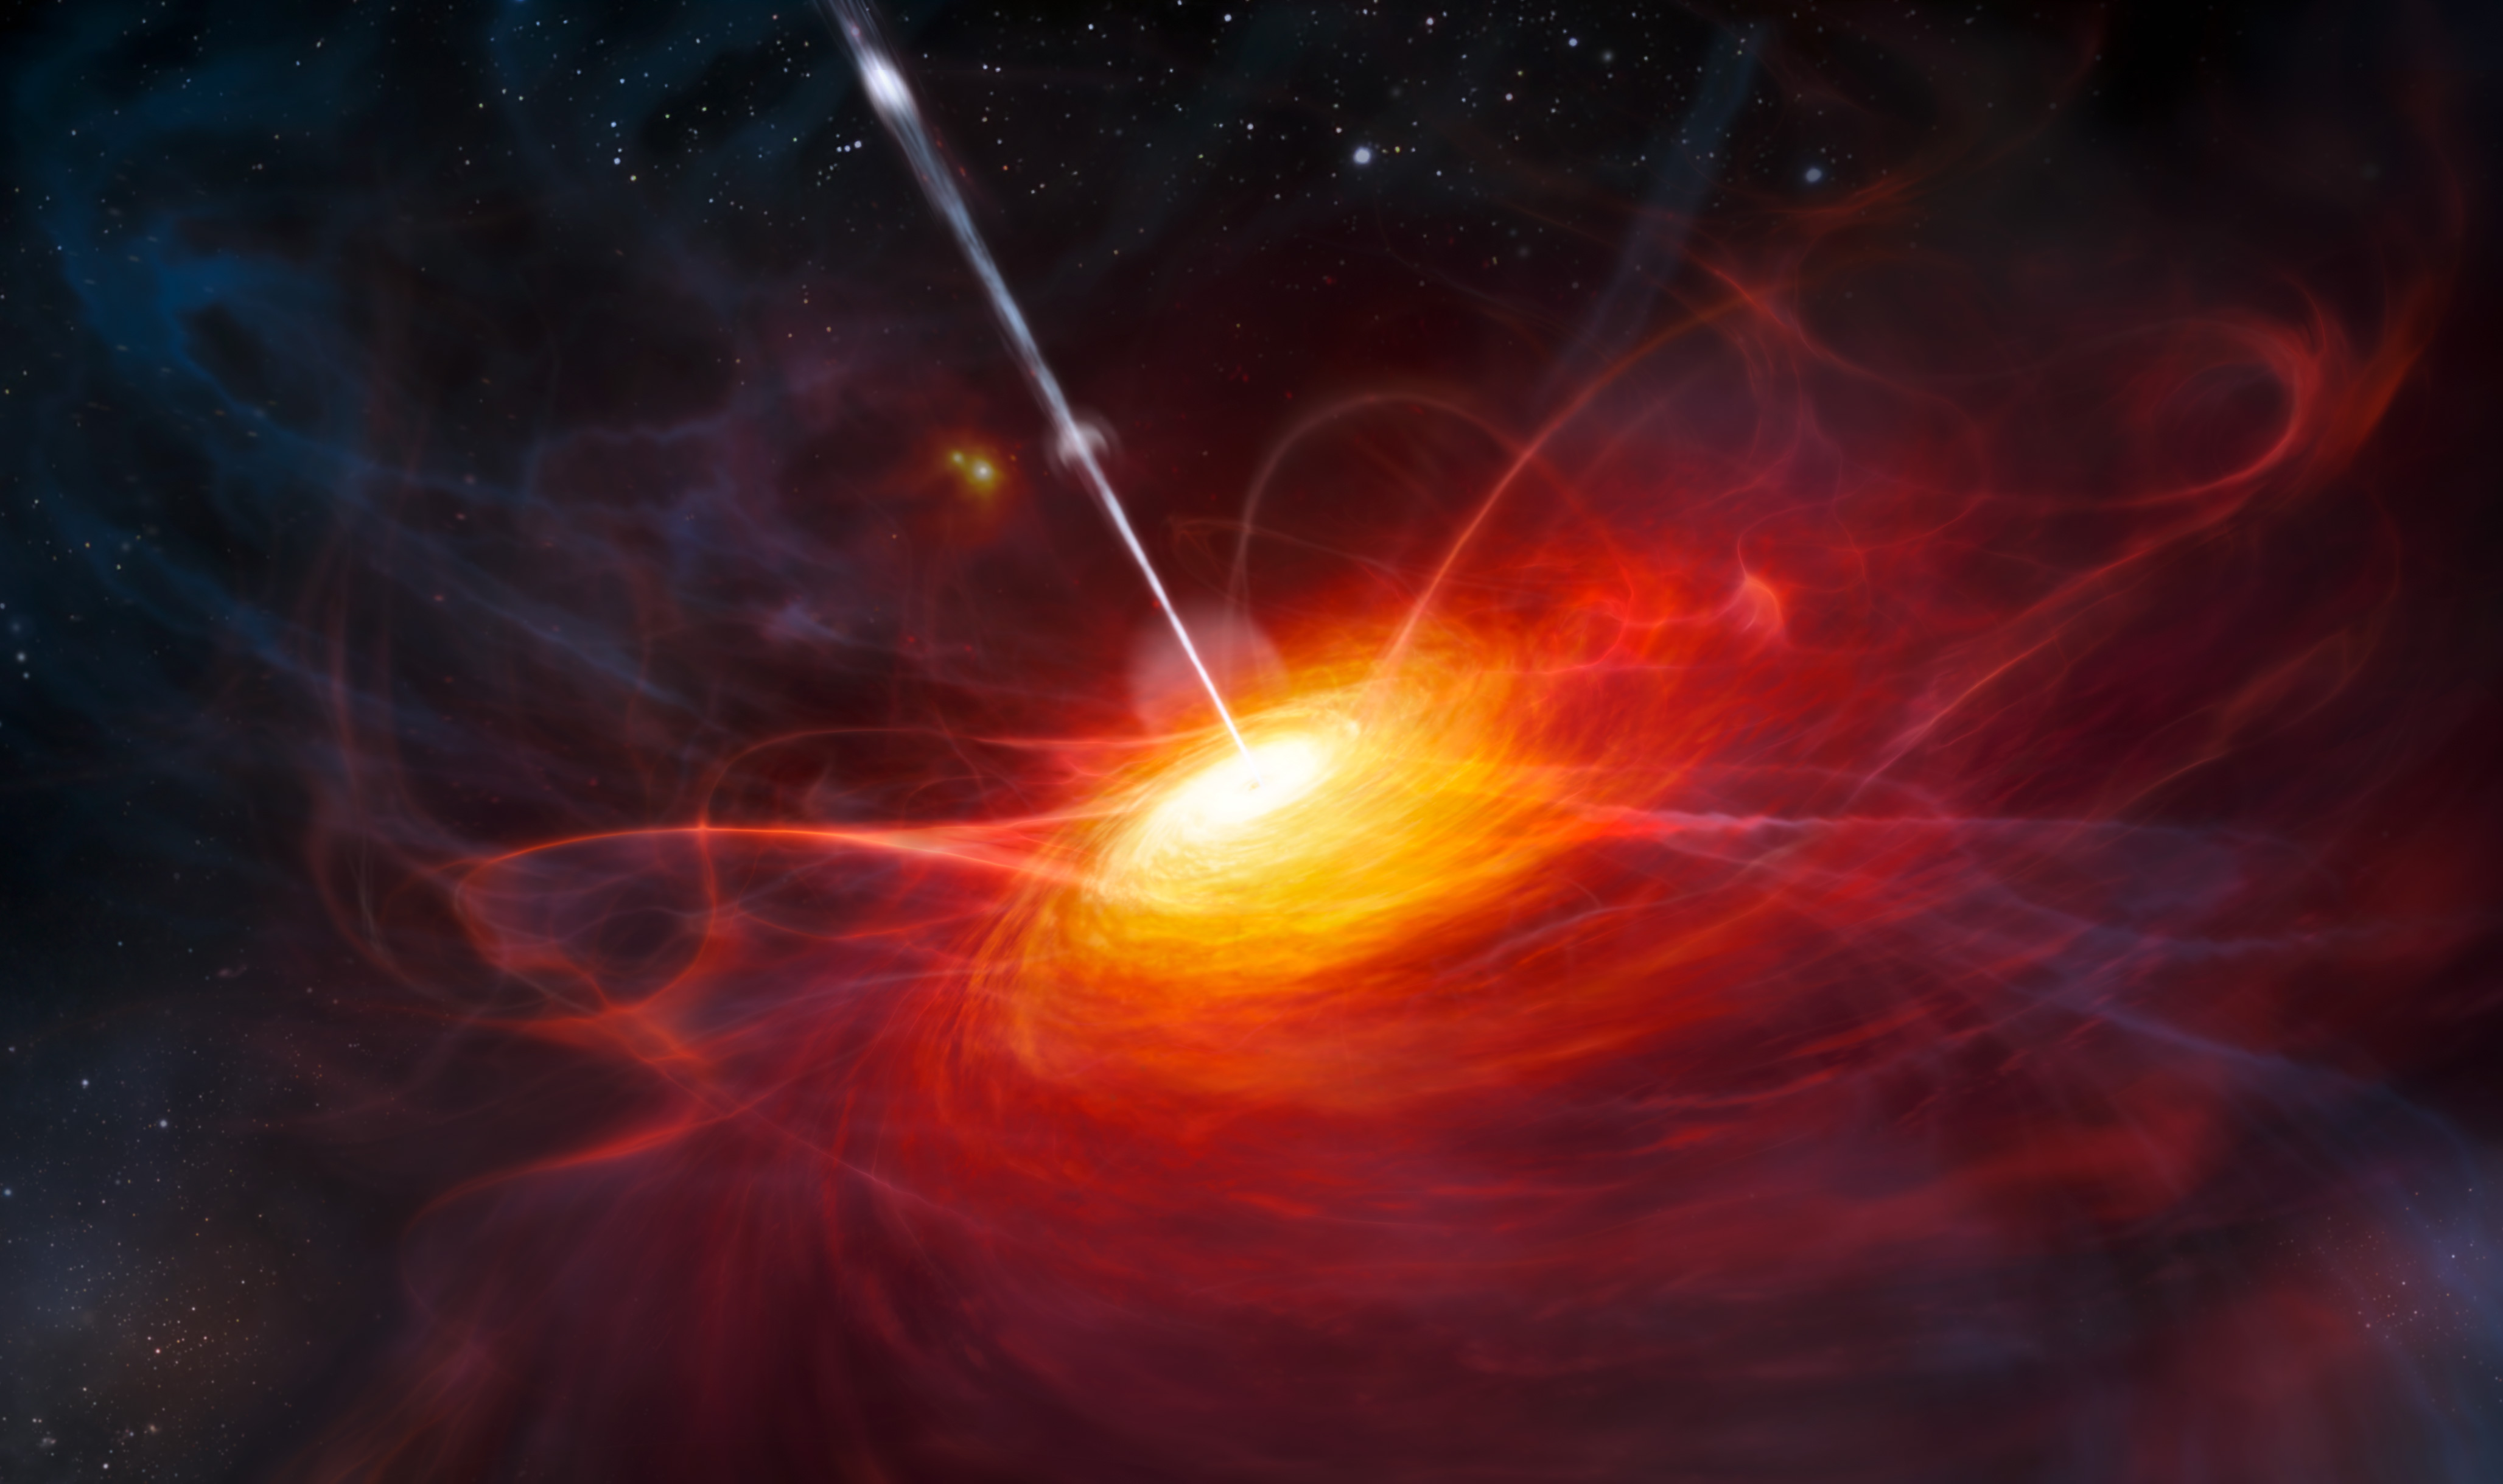 Some black holes bring dead “zombie” stars back to life just to rip them apart later